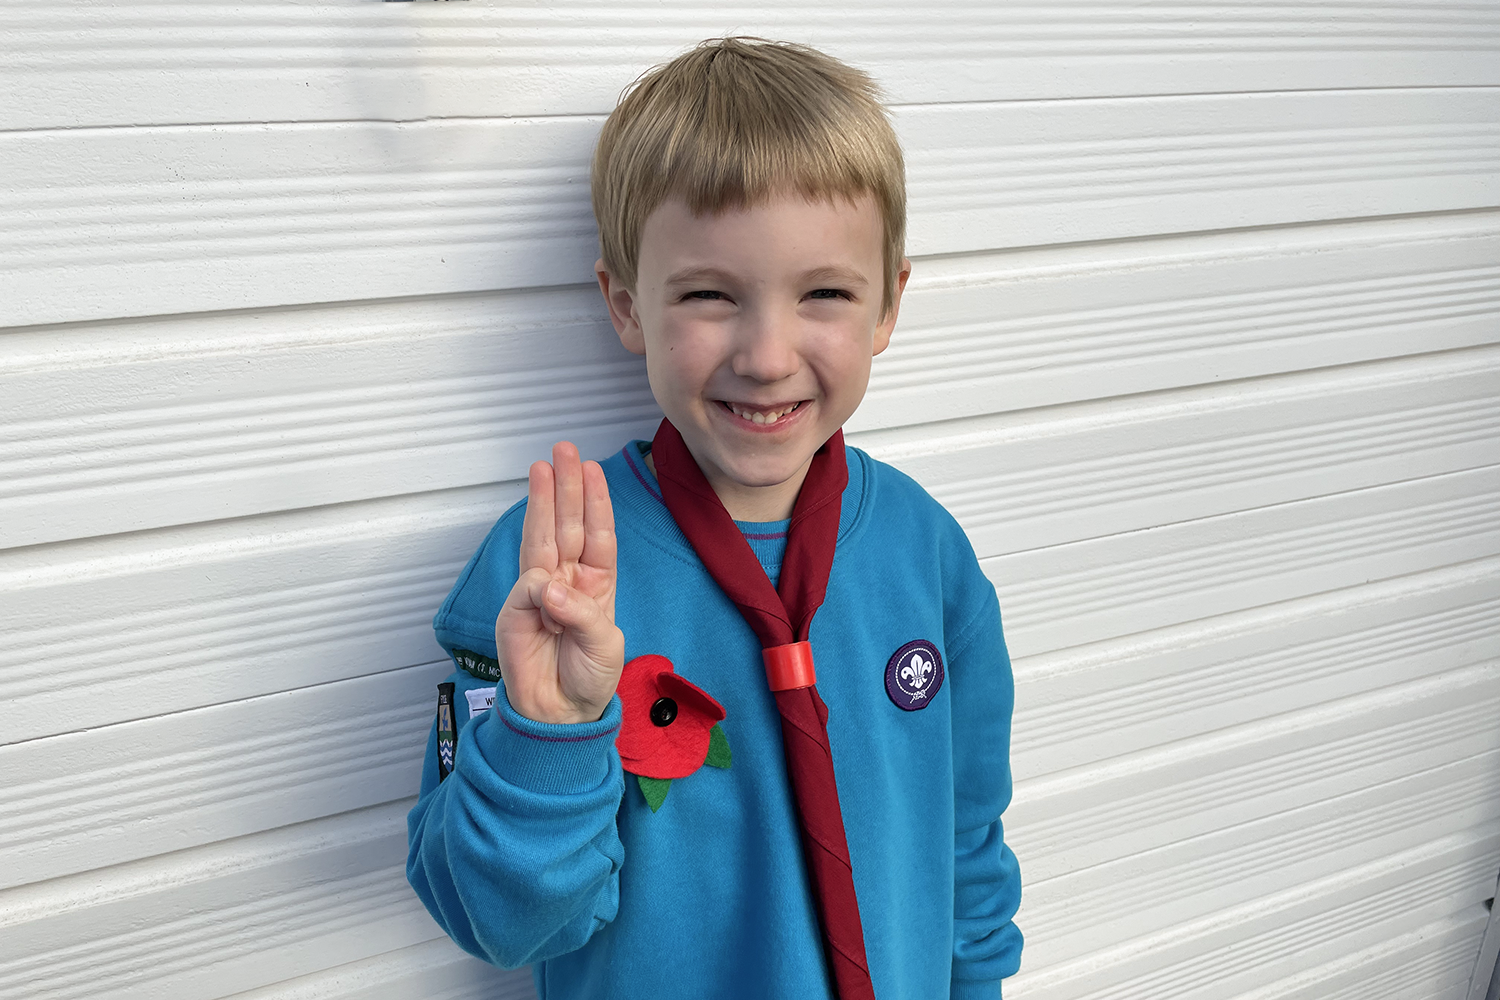 Gabe in his Beaver uniform making the Scout sign, standing in front of a white background